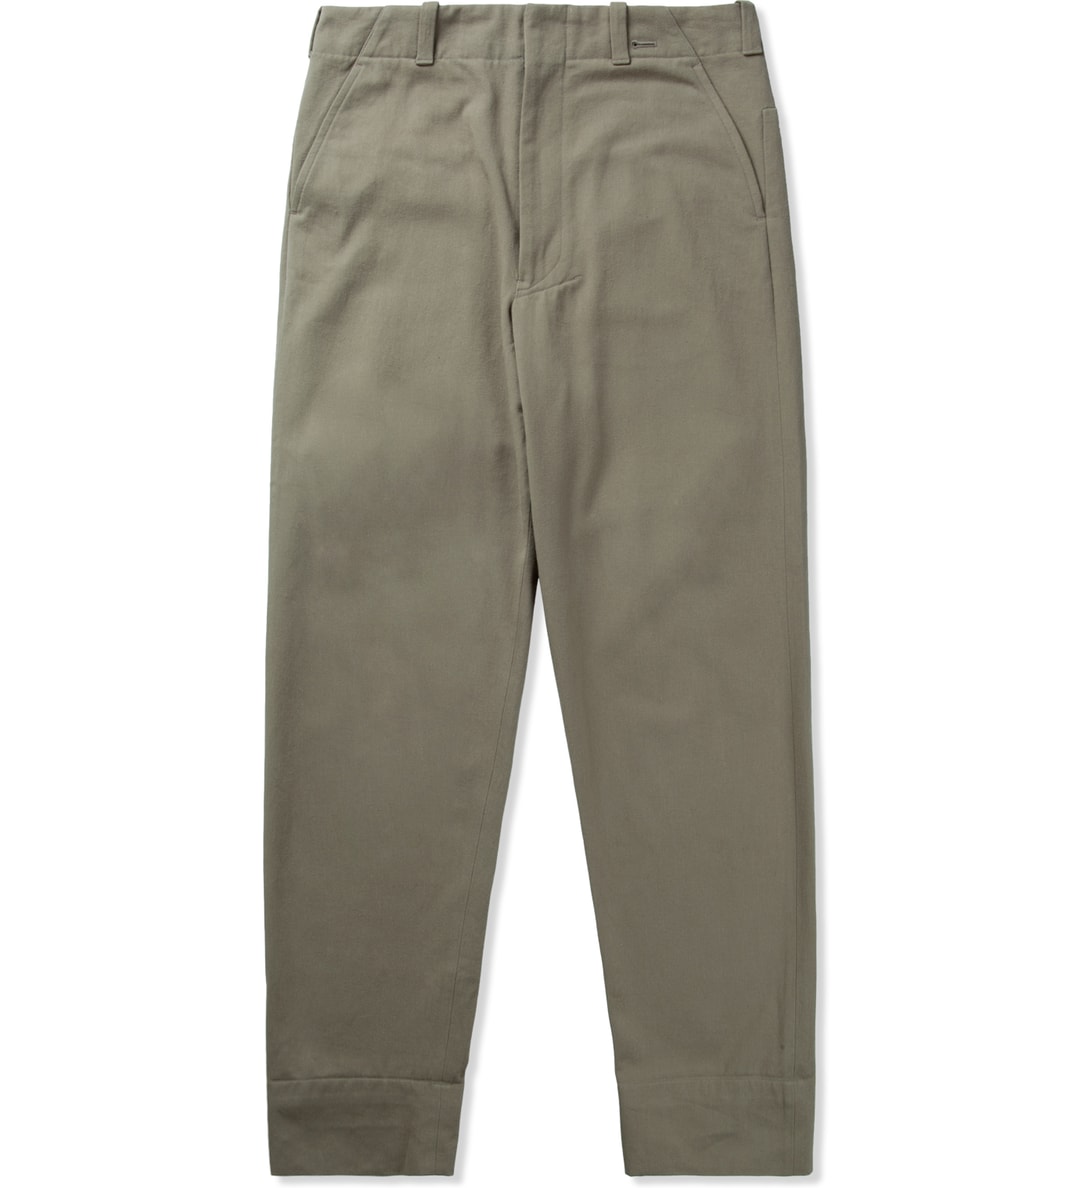 salvy - Beige SV01-0214A Pant | HBX - Globally Curated Fashion and ...